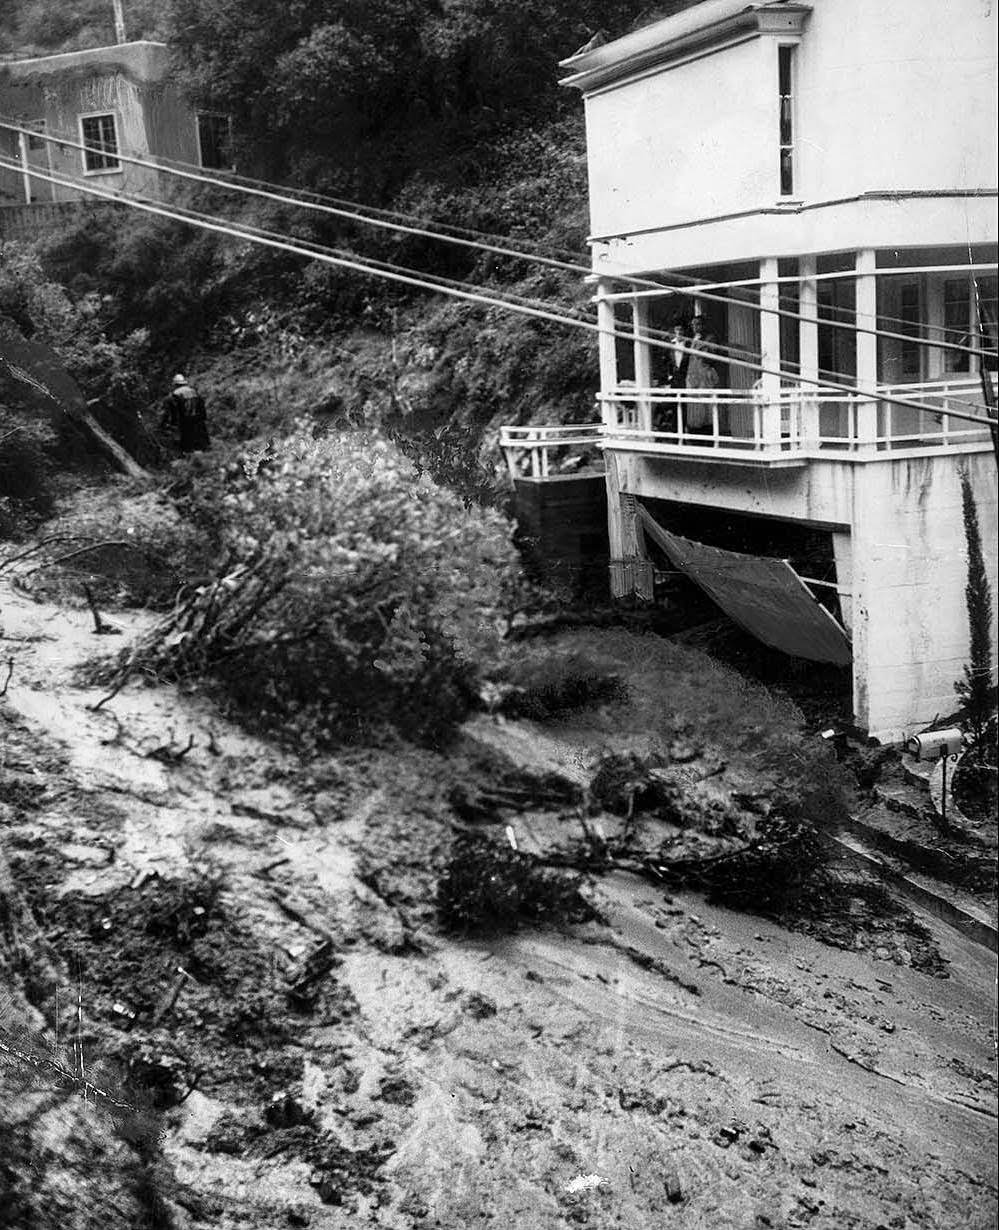 Water-soaked earth moved rapidly down the side of Laurel Canyon at Kirkwood Avenue, carrying trees and boulders in its path and wrecking the basement garage of this home, 1938